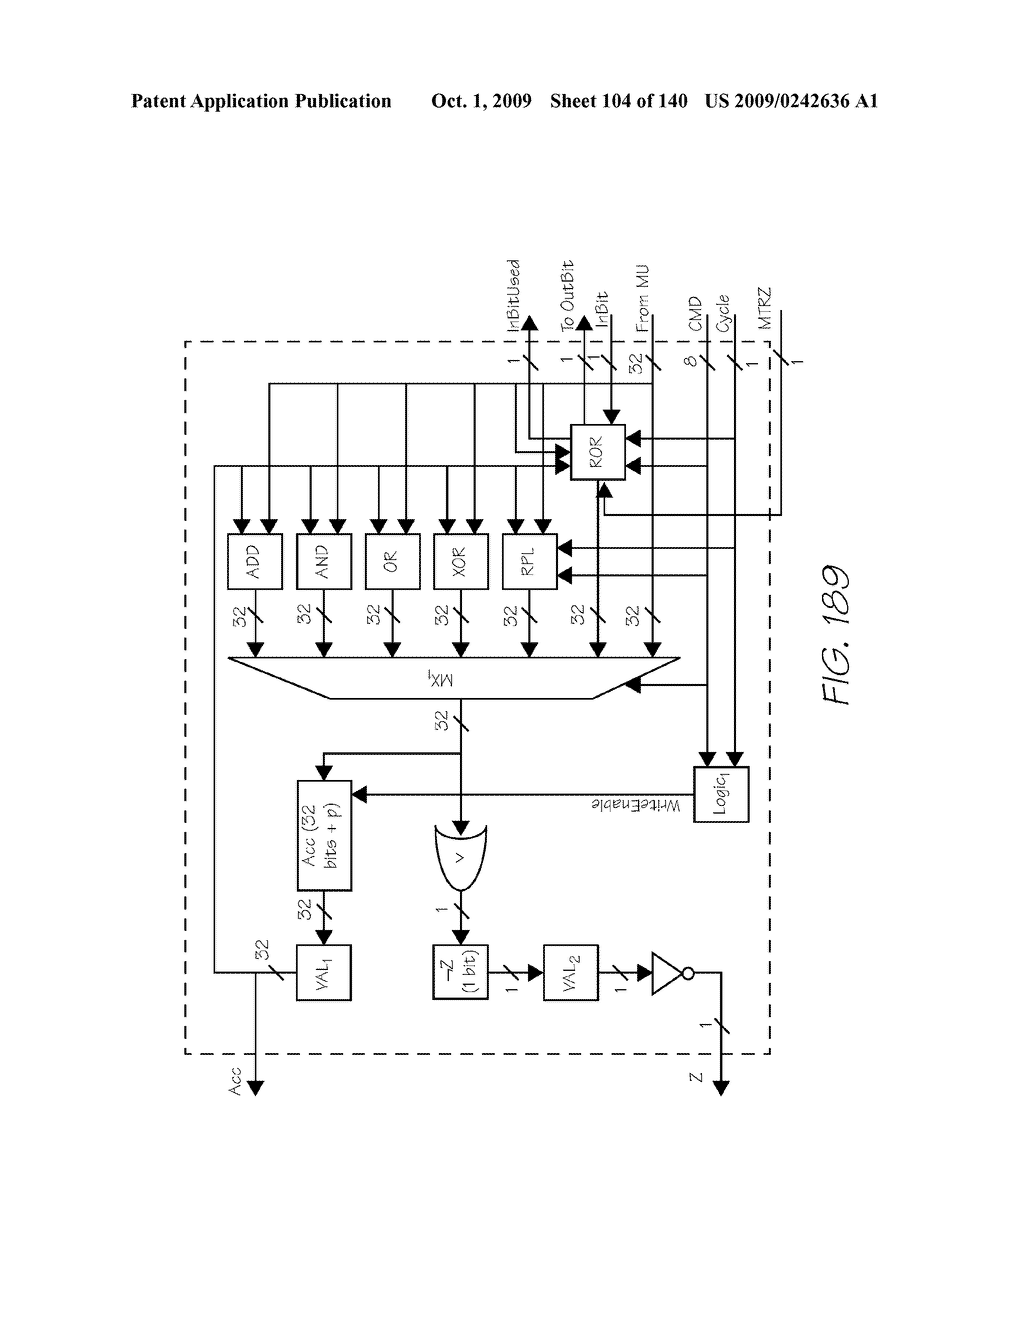 PROCESSOR FOR A PRINT ENGINE ASSEMBLY HAVING POWER MANAGEMENT CIRCUITRY - diagram, schematic, and image 105